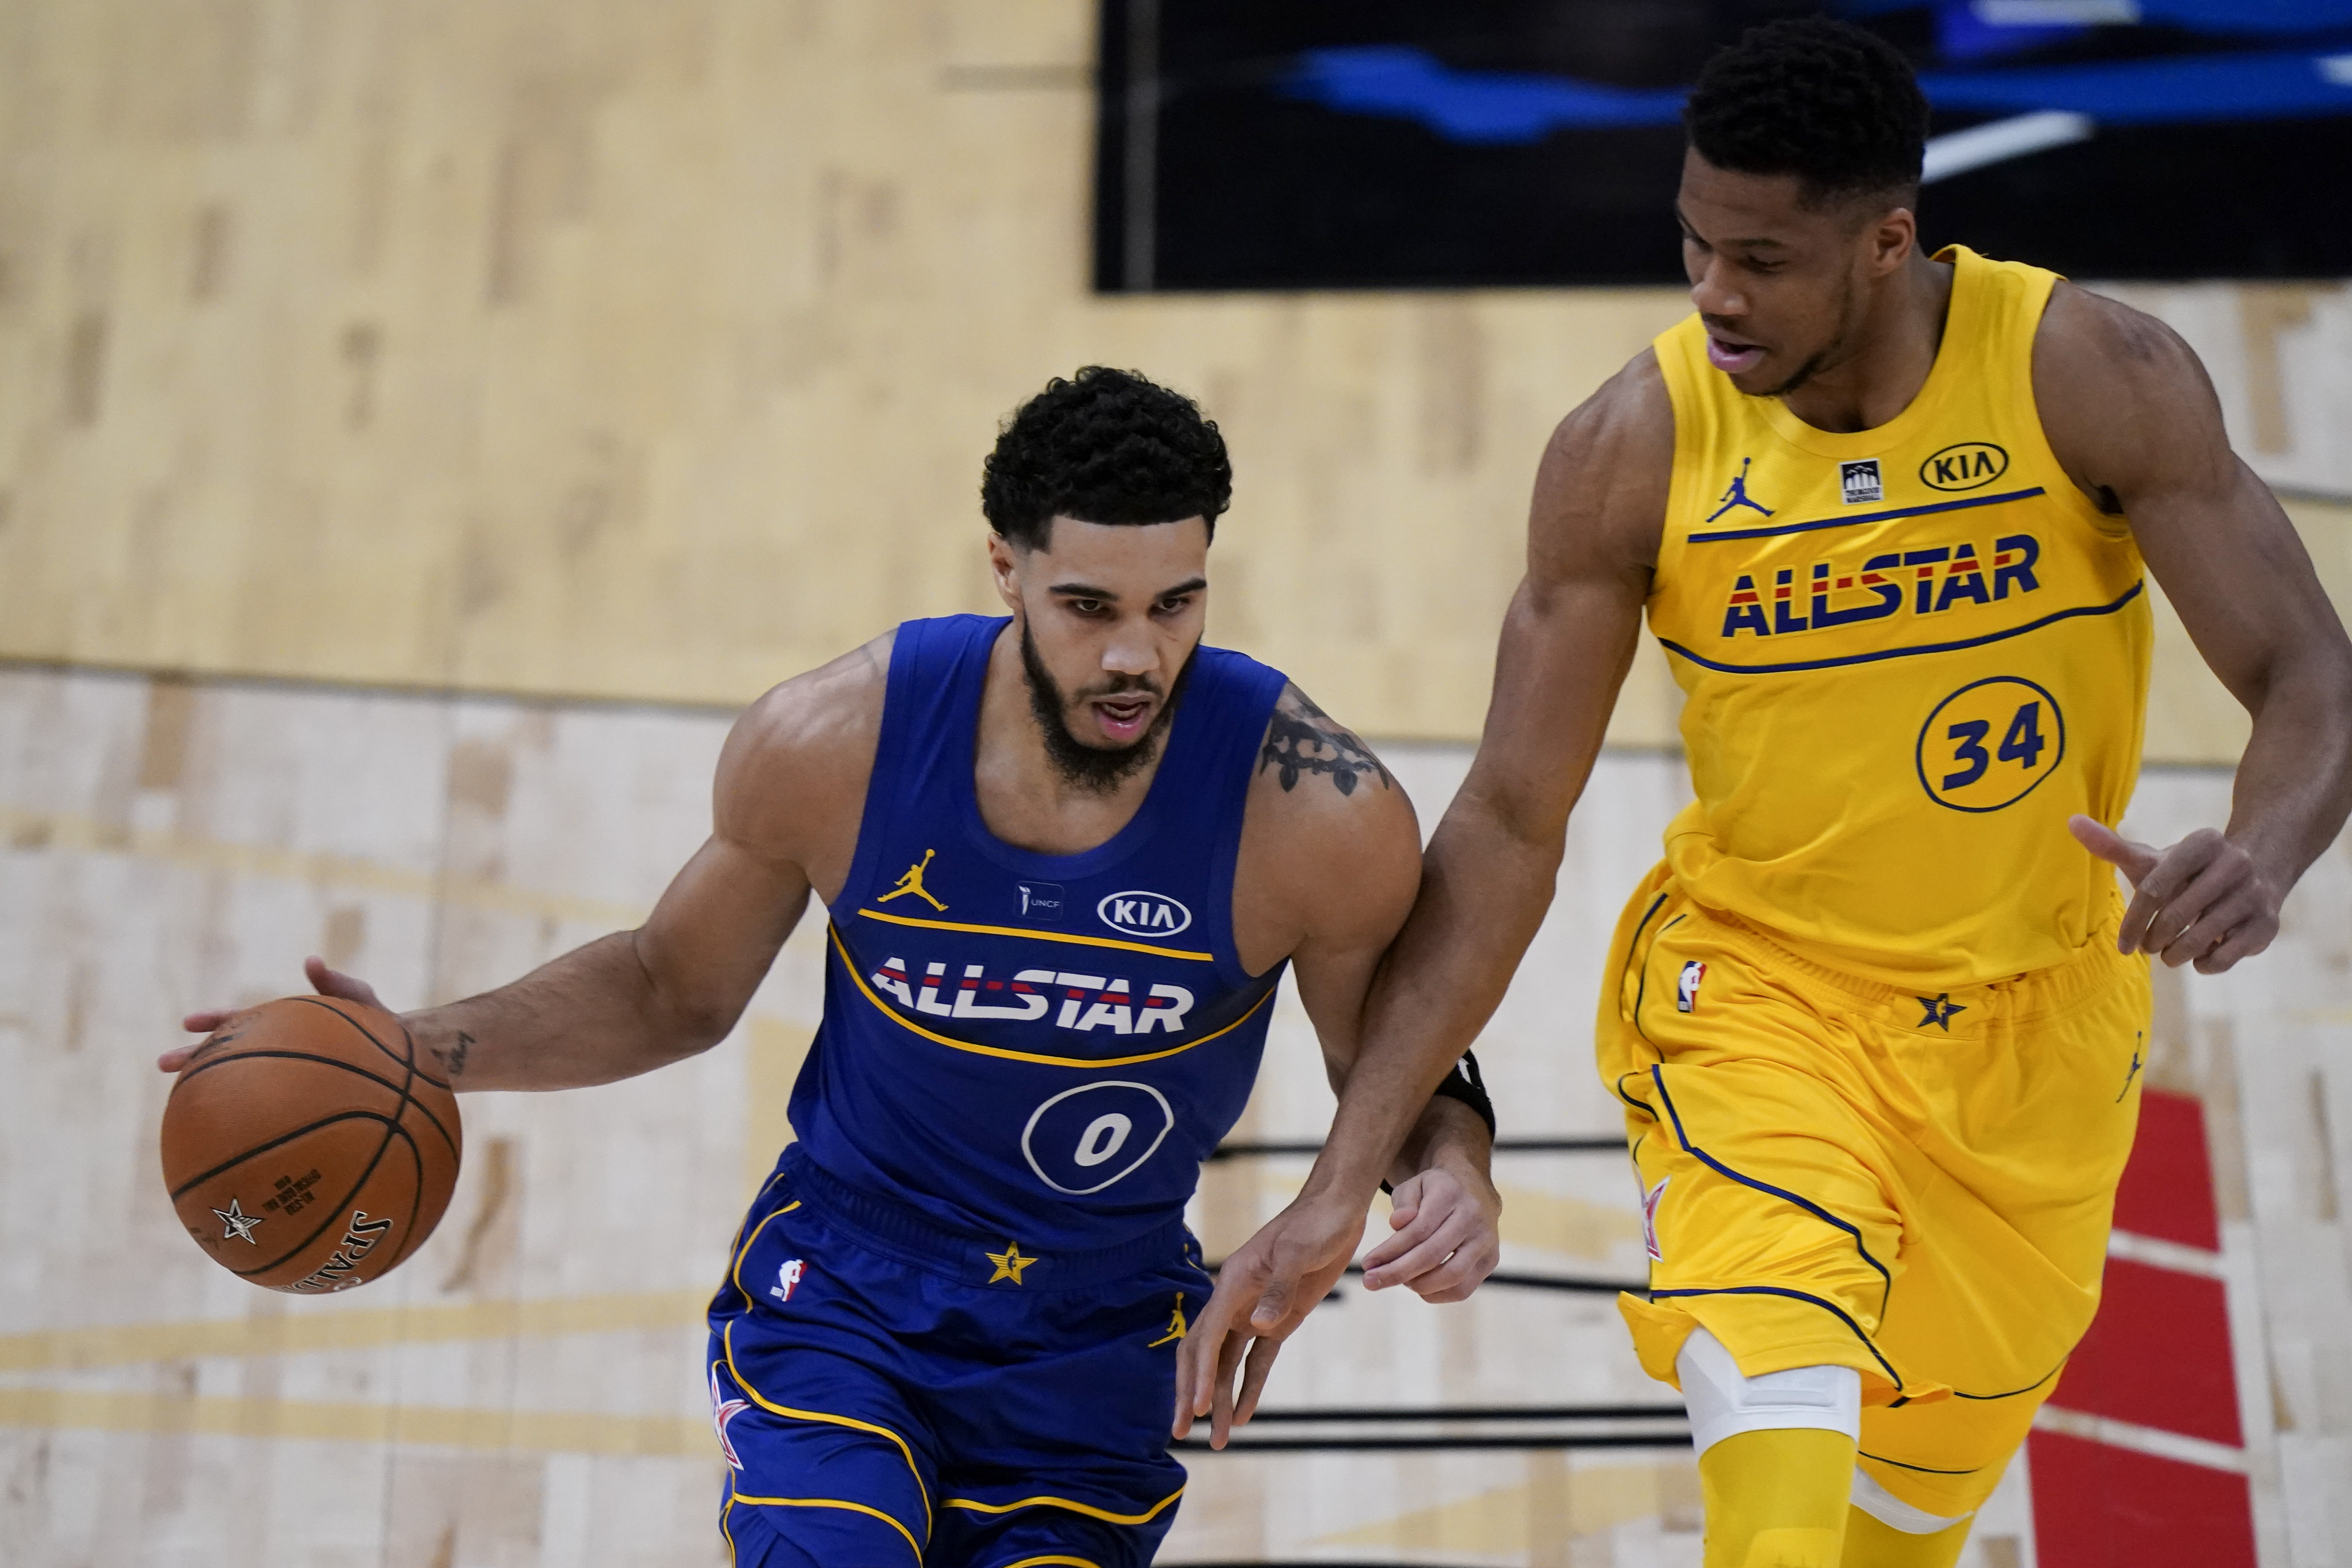 NBA All-Star Game 2022 Live stream, start time, TV channel, how to watch Team LeBron vs